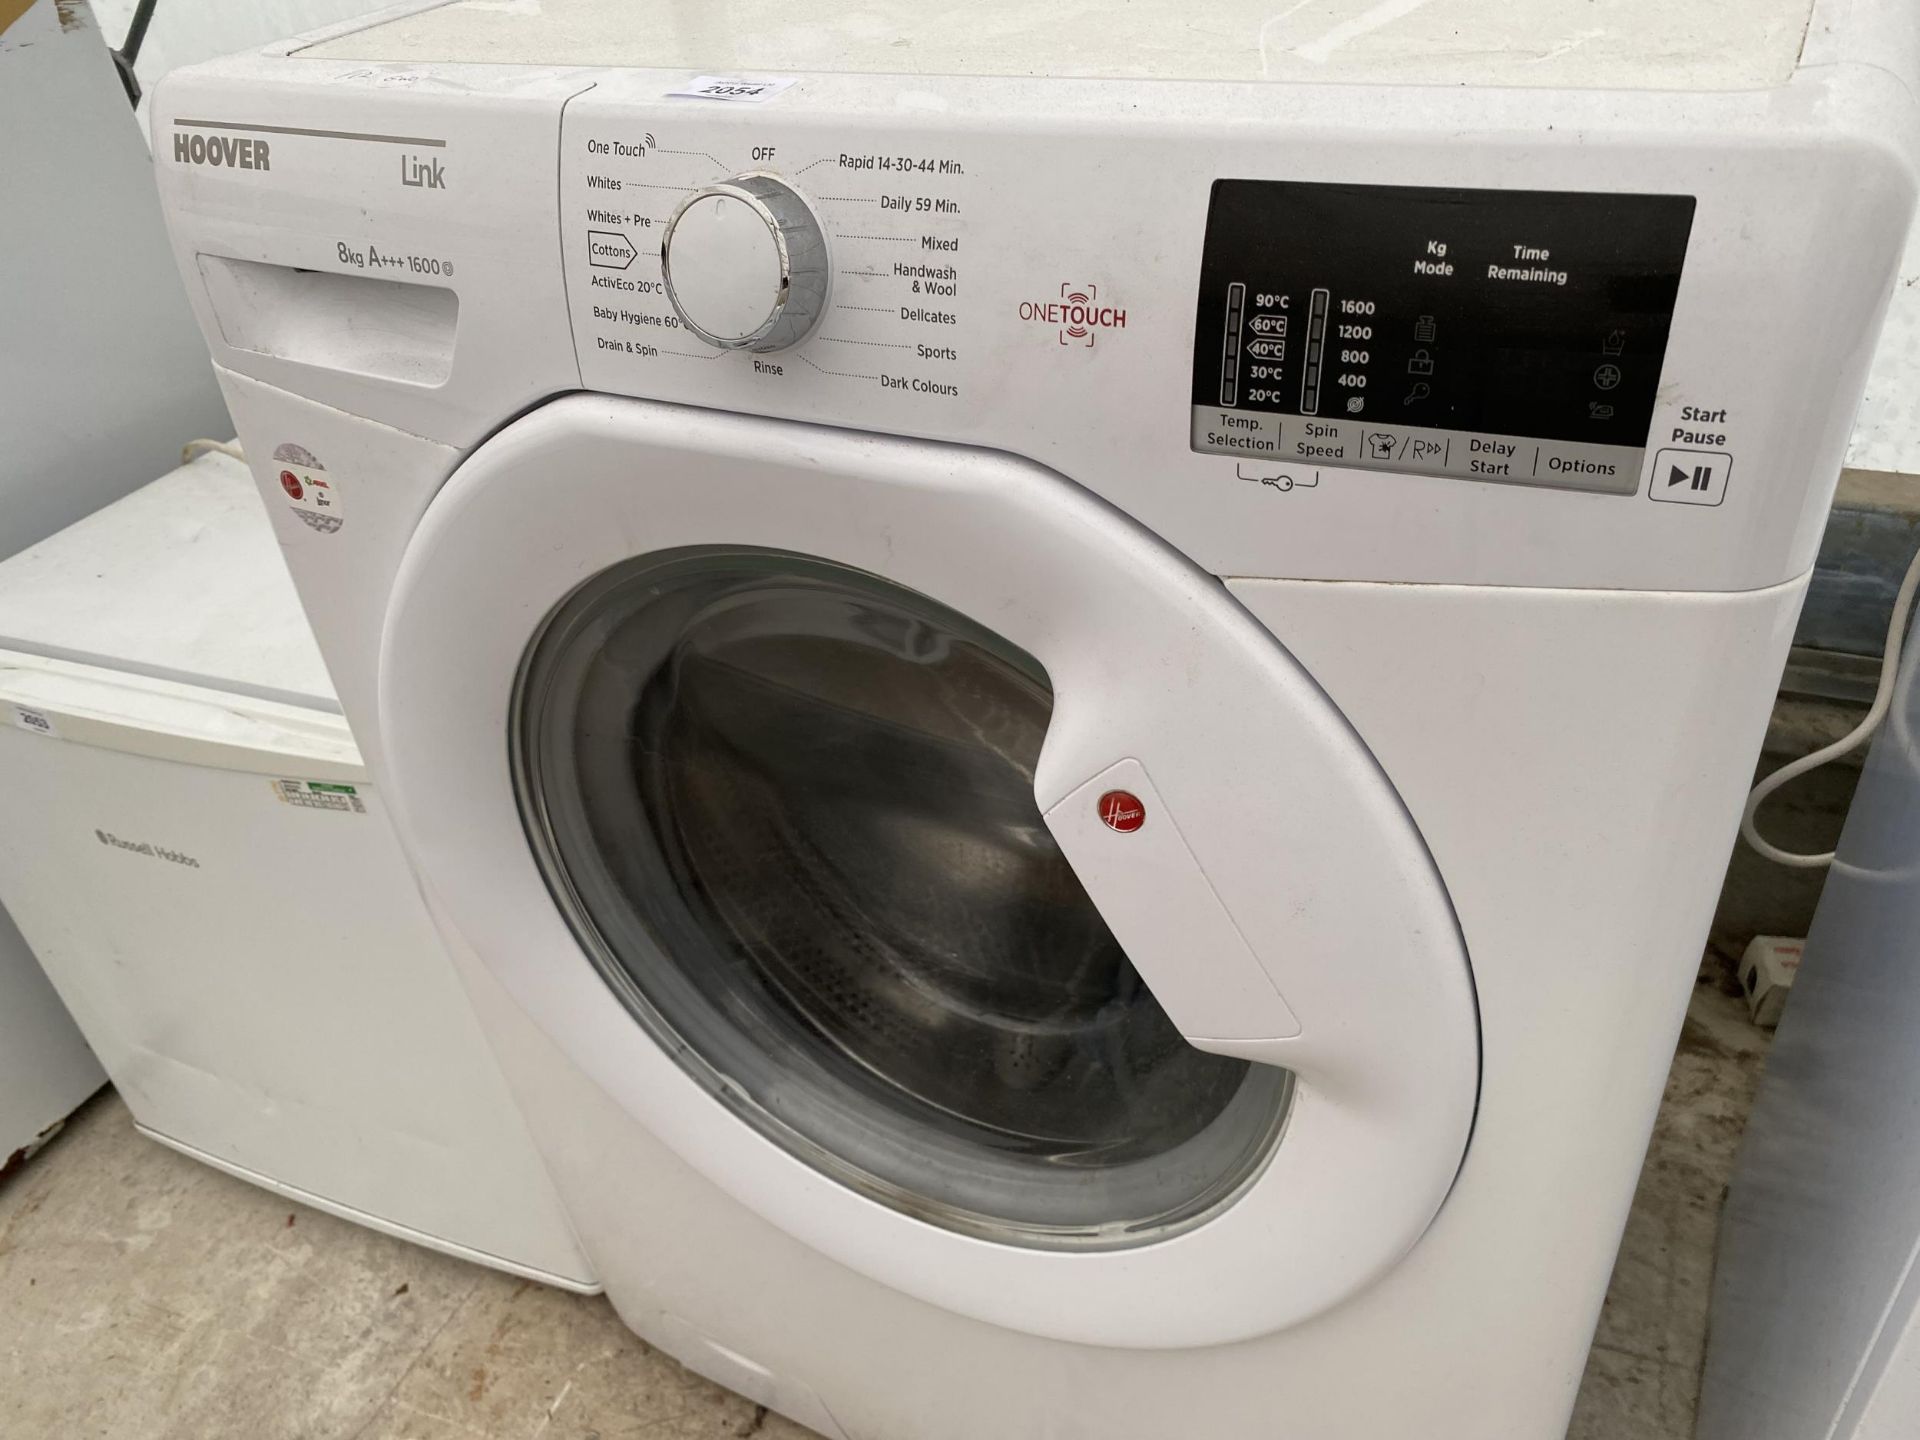 A WHITE HOOVER 8KG WASHING MACHINE BELIEVED IN WORKING ORDER BUT NO WARRANTY - Image 2 of 3